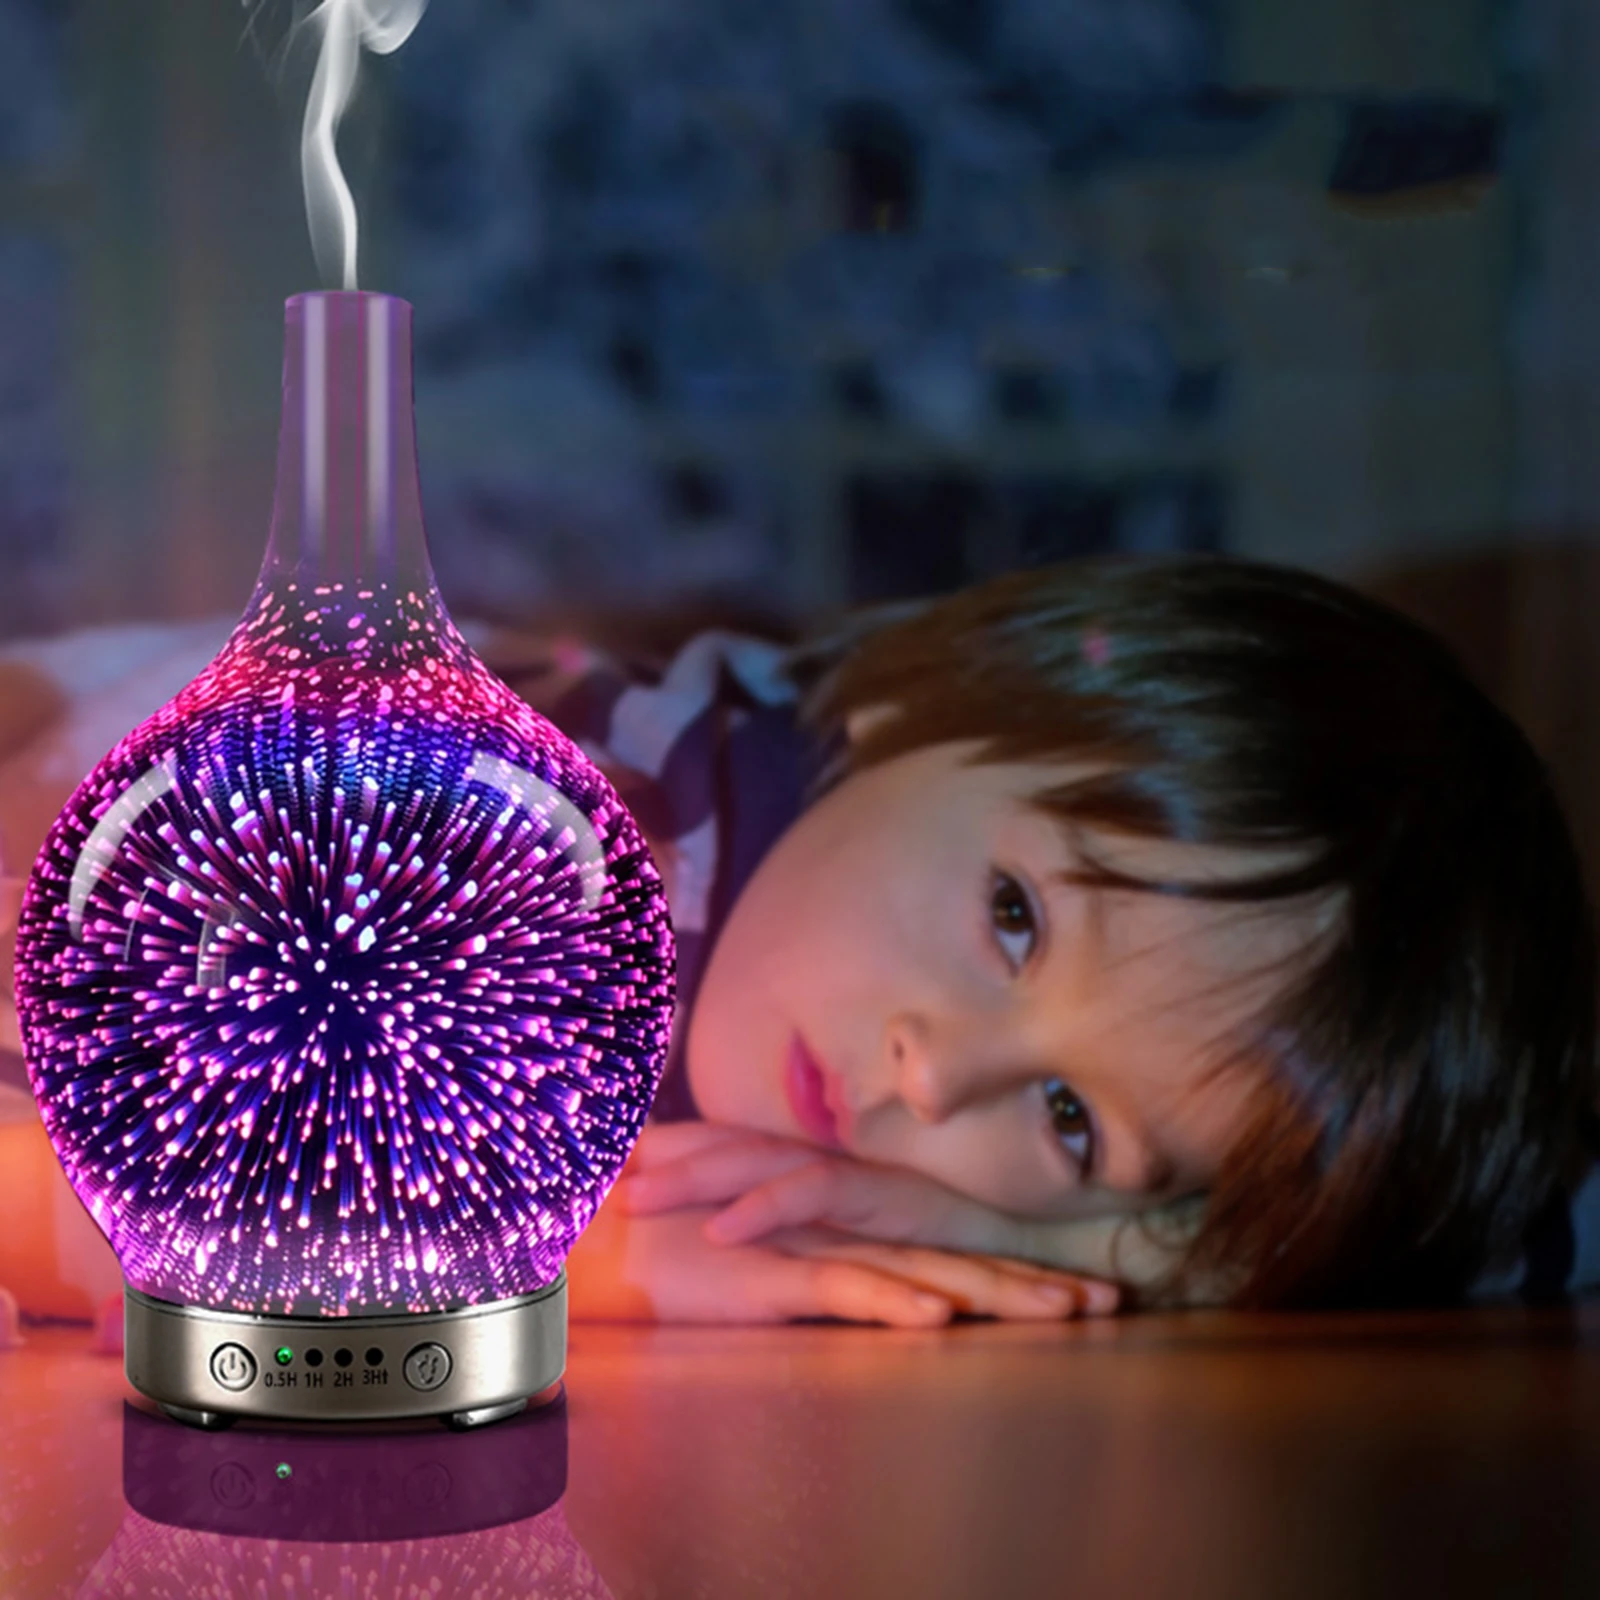 3D Essential Oil Diffuser Quiet Aromatherapy Humidifier Cool Mist with 7 Color Changing Night Light Auto Shut-Off Yoga Leisure